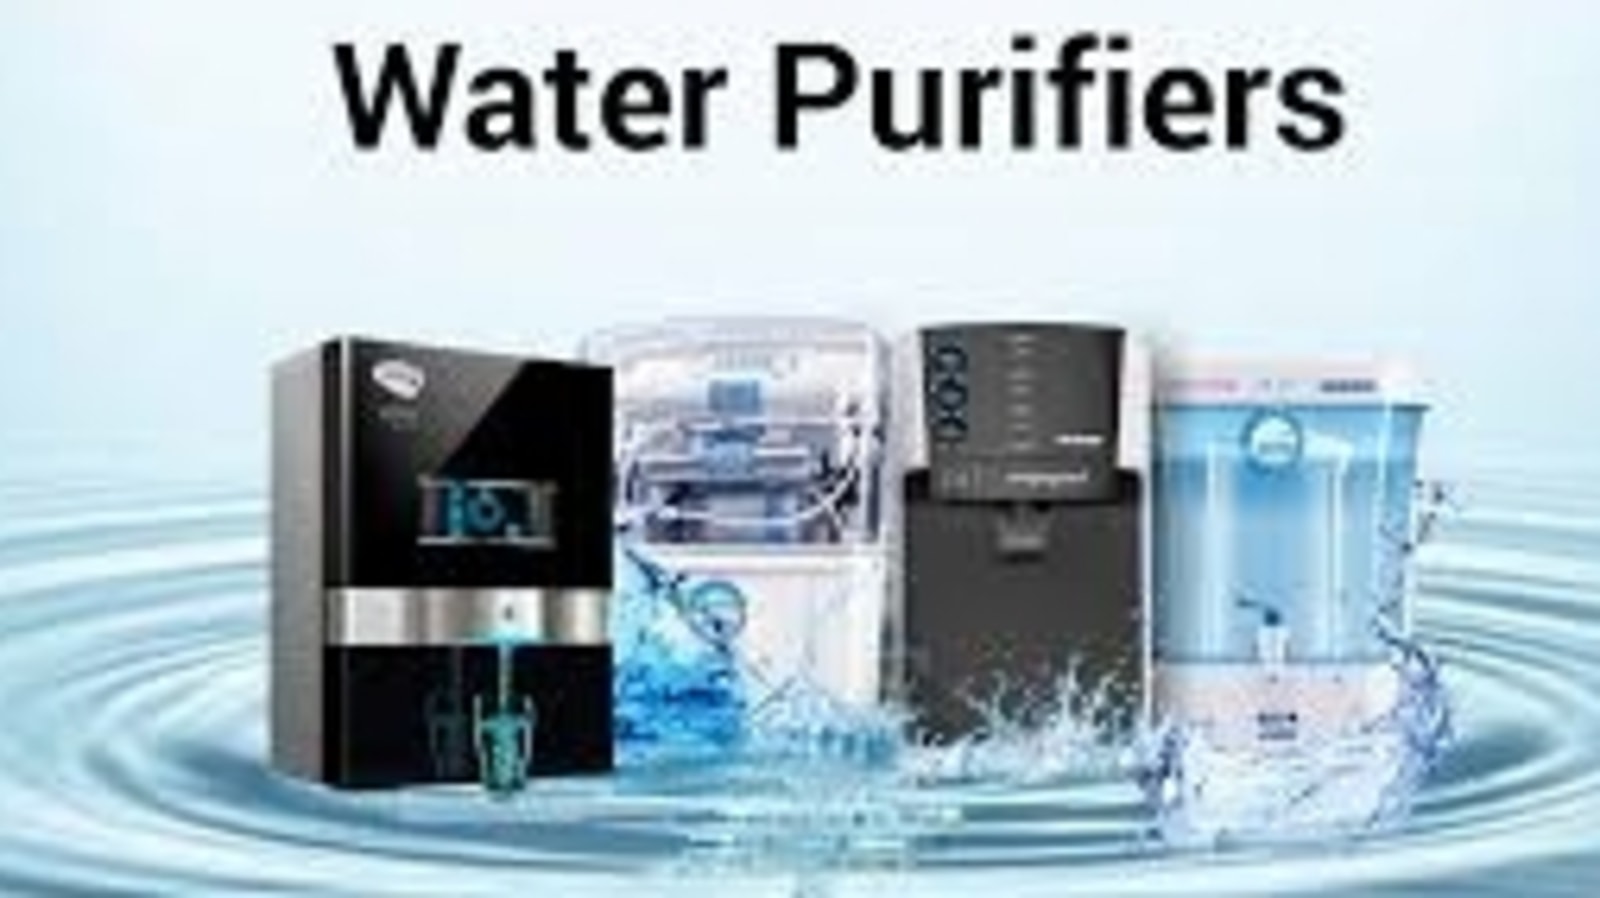 Book RO Service Online  Compare and Buy Water Purifier - RO Care India